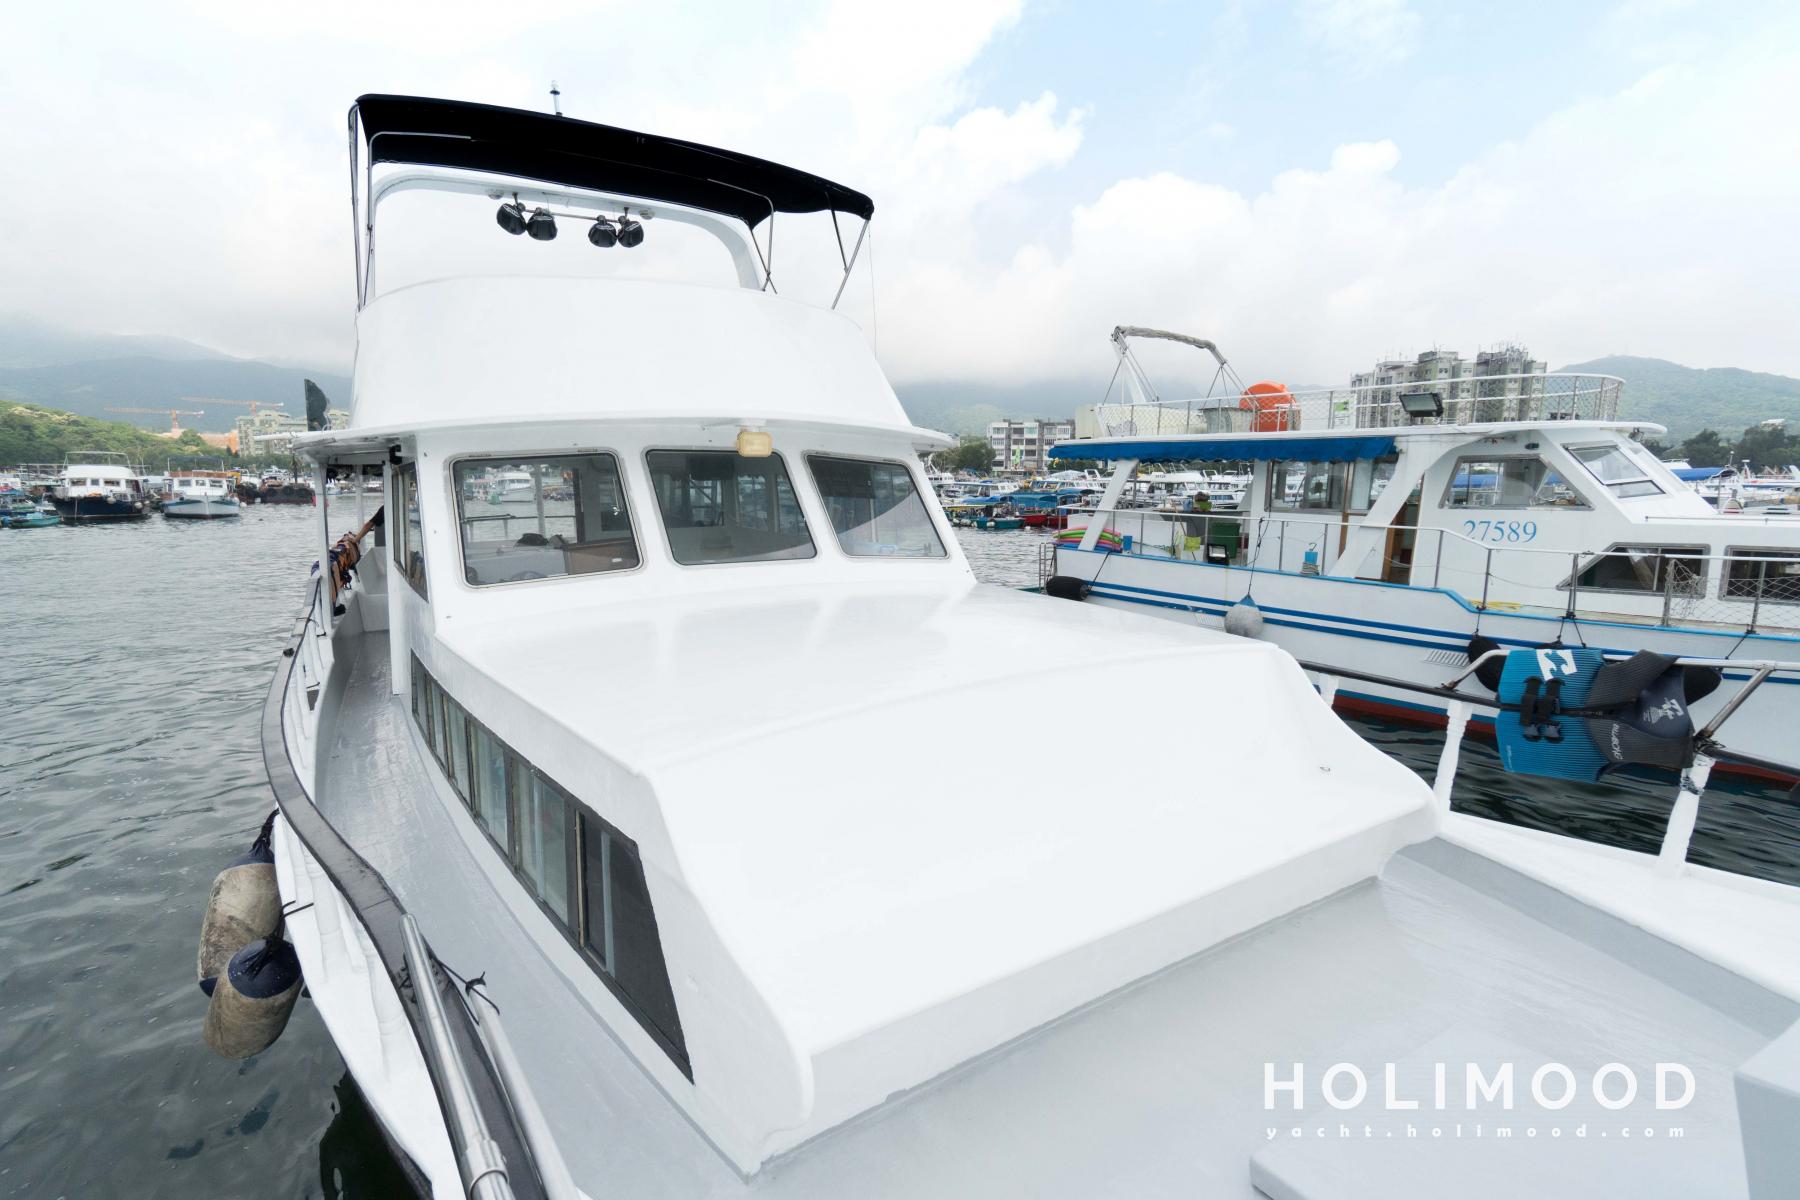 HG01 Sai Kung All-inclusive Boat Trip (Free lunch, Crab Congee, Professional Wakeboard and latest water toys) 18